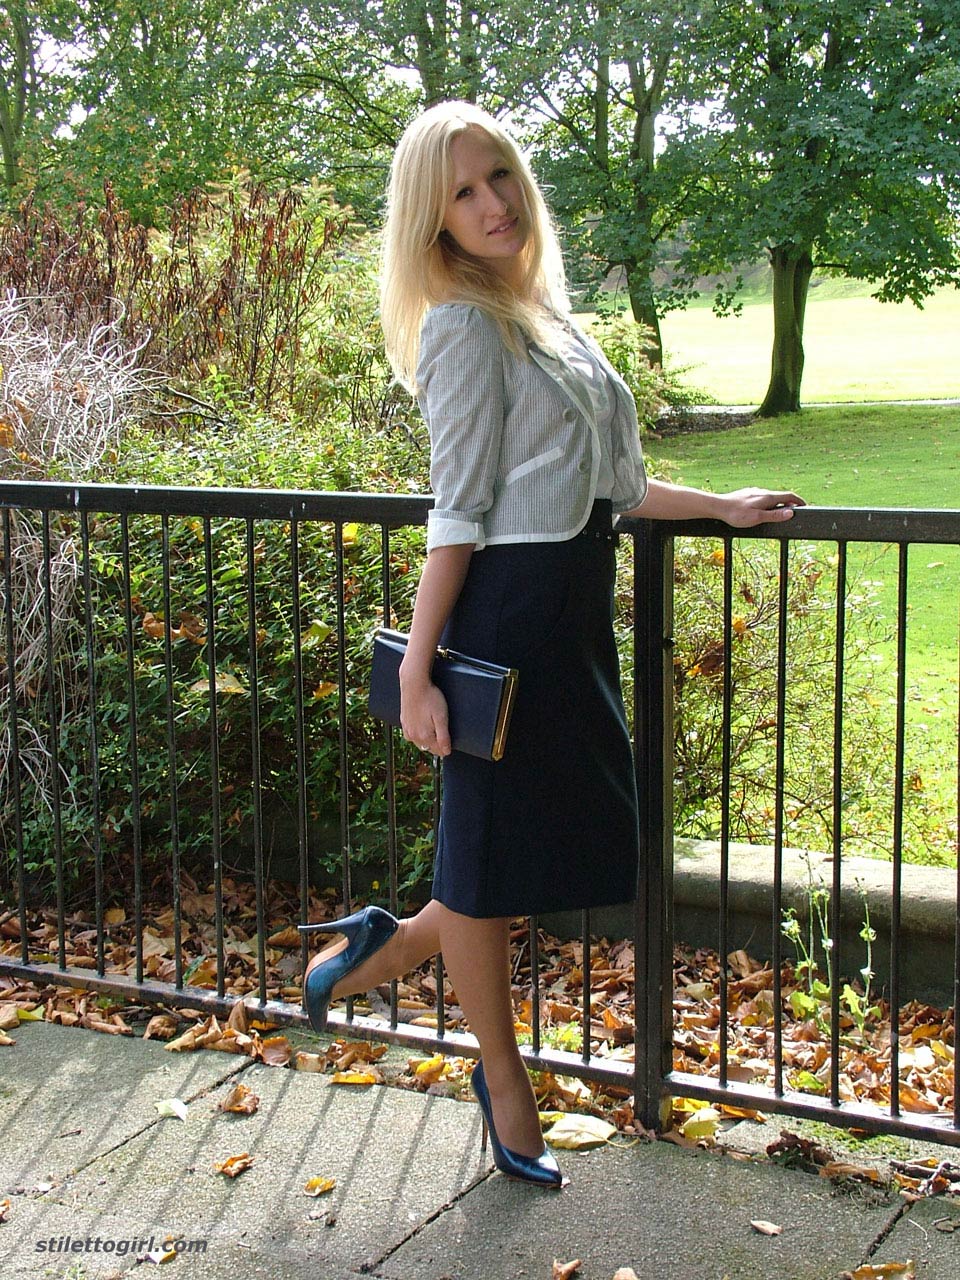 Teen Secretary In High Heels And Nylons Pic 9 Of Blonde